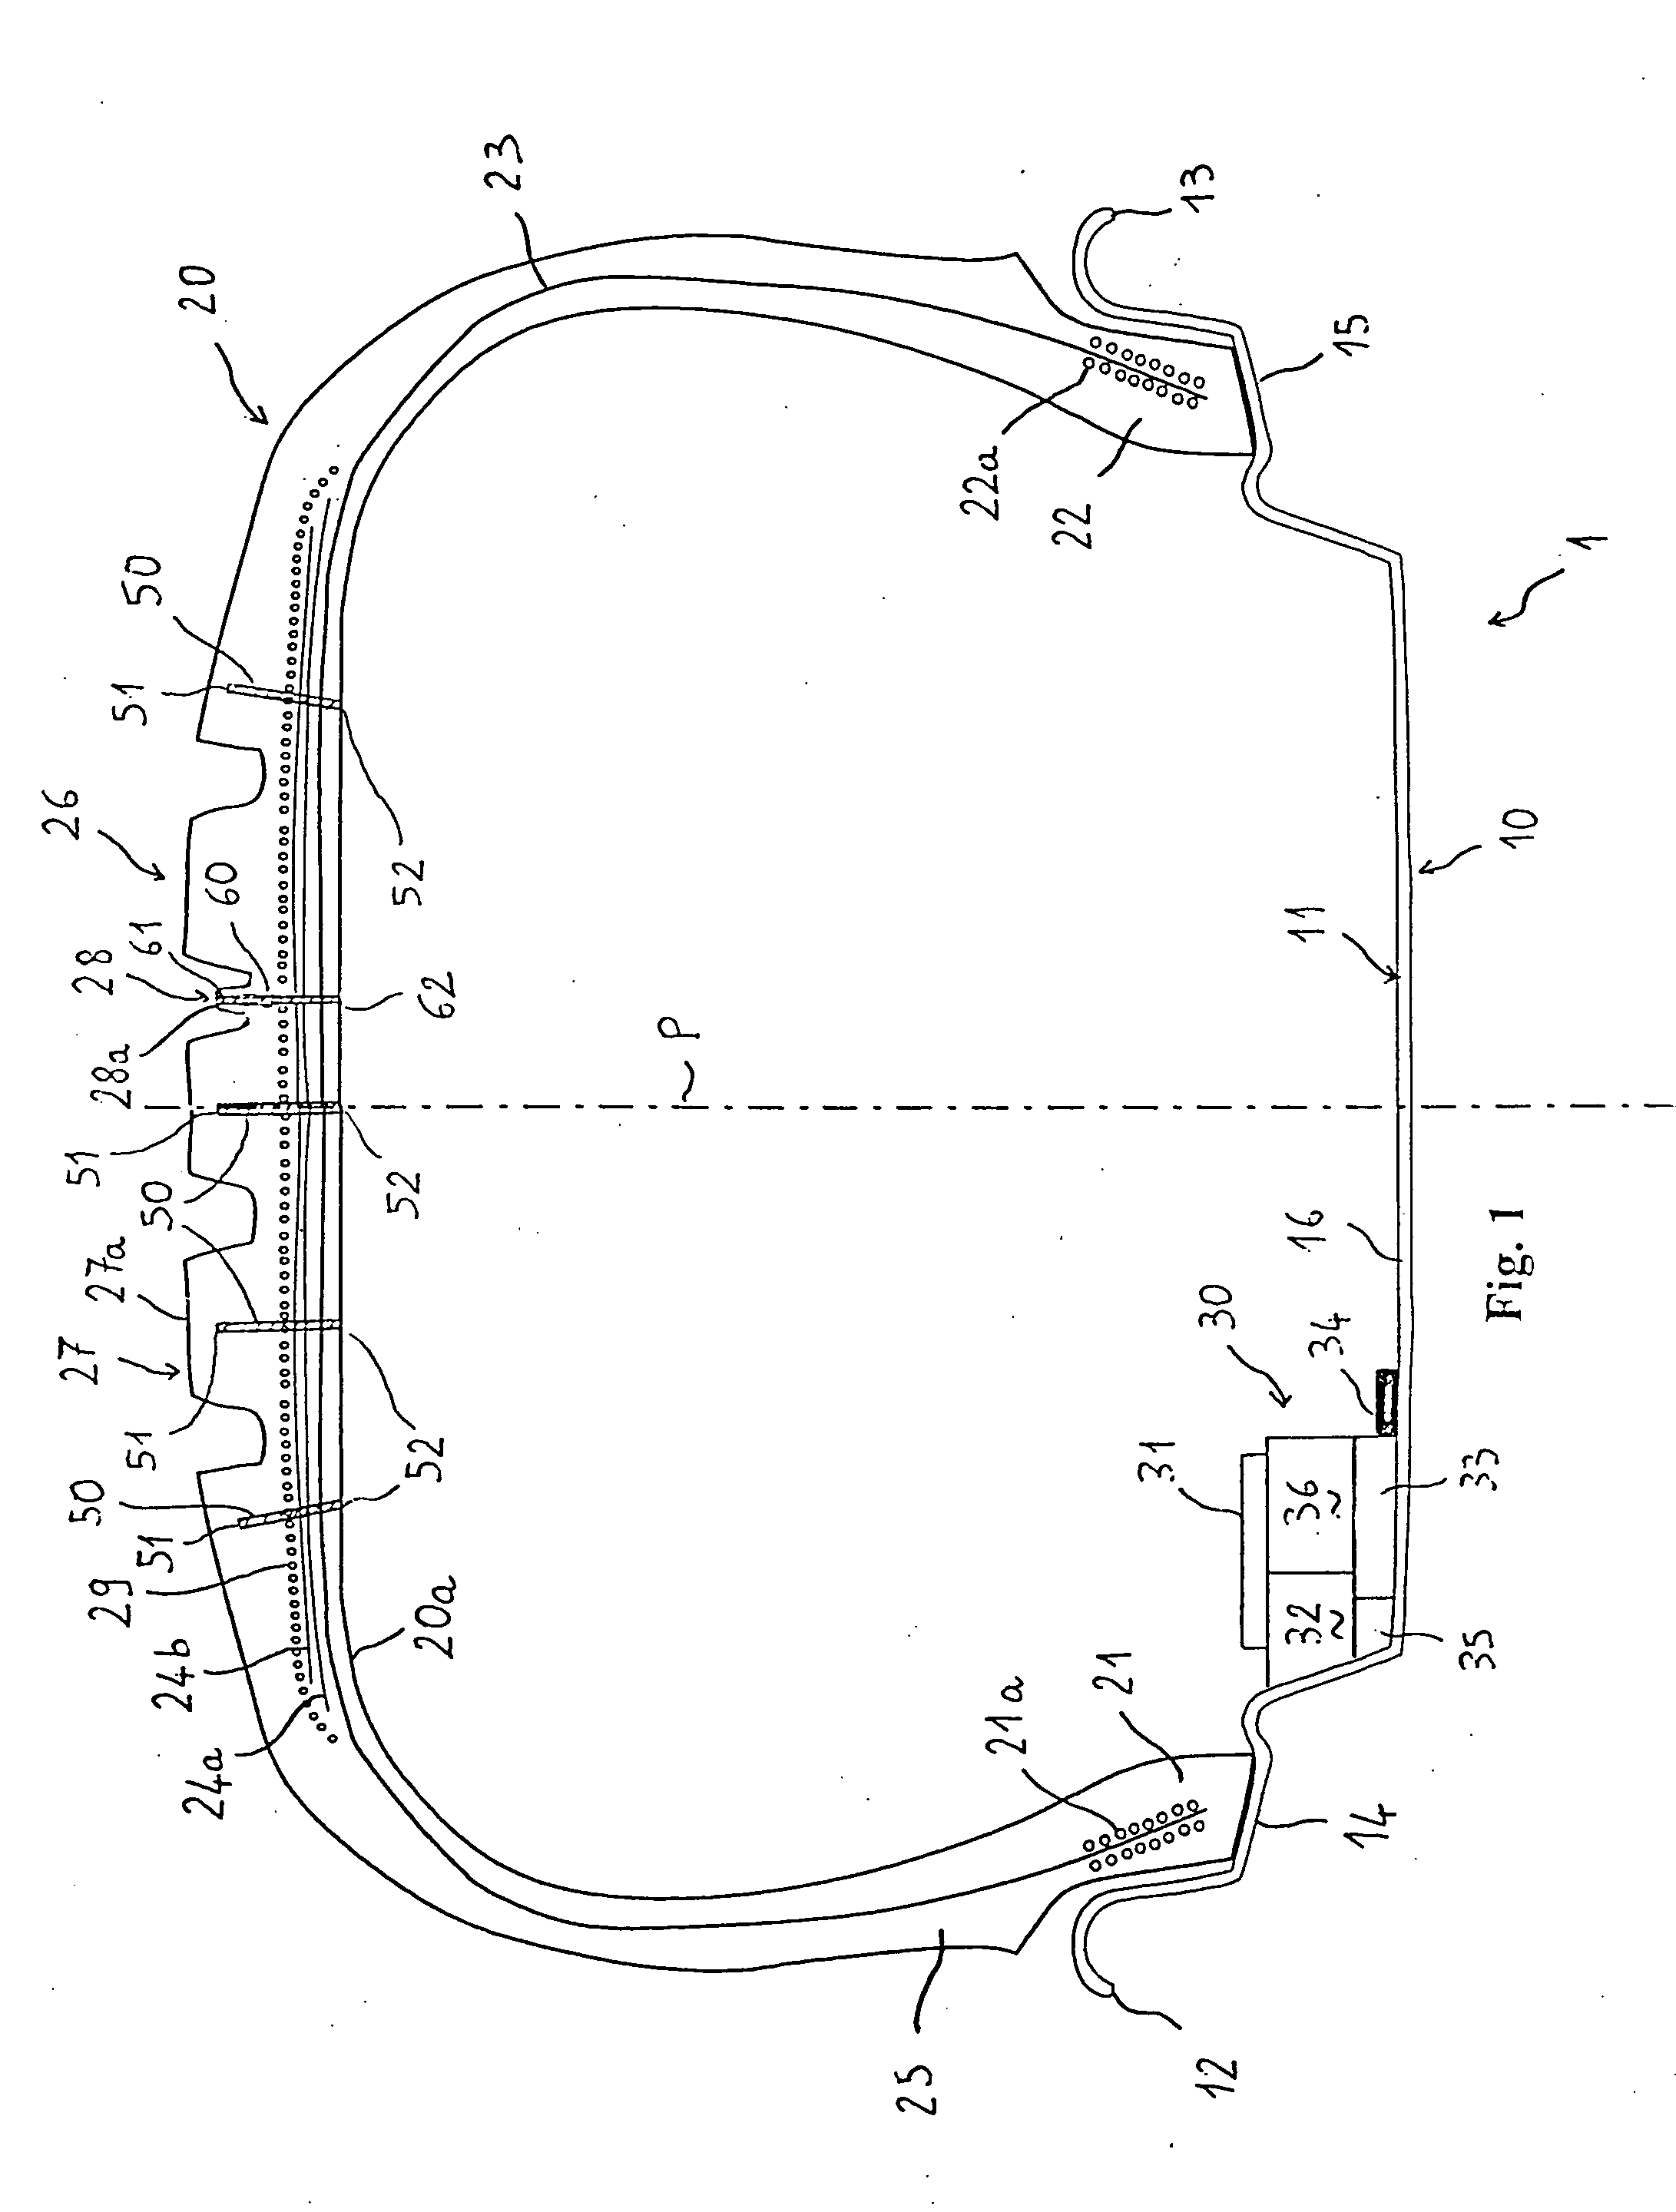 Method and systems for measuring wear on a tire